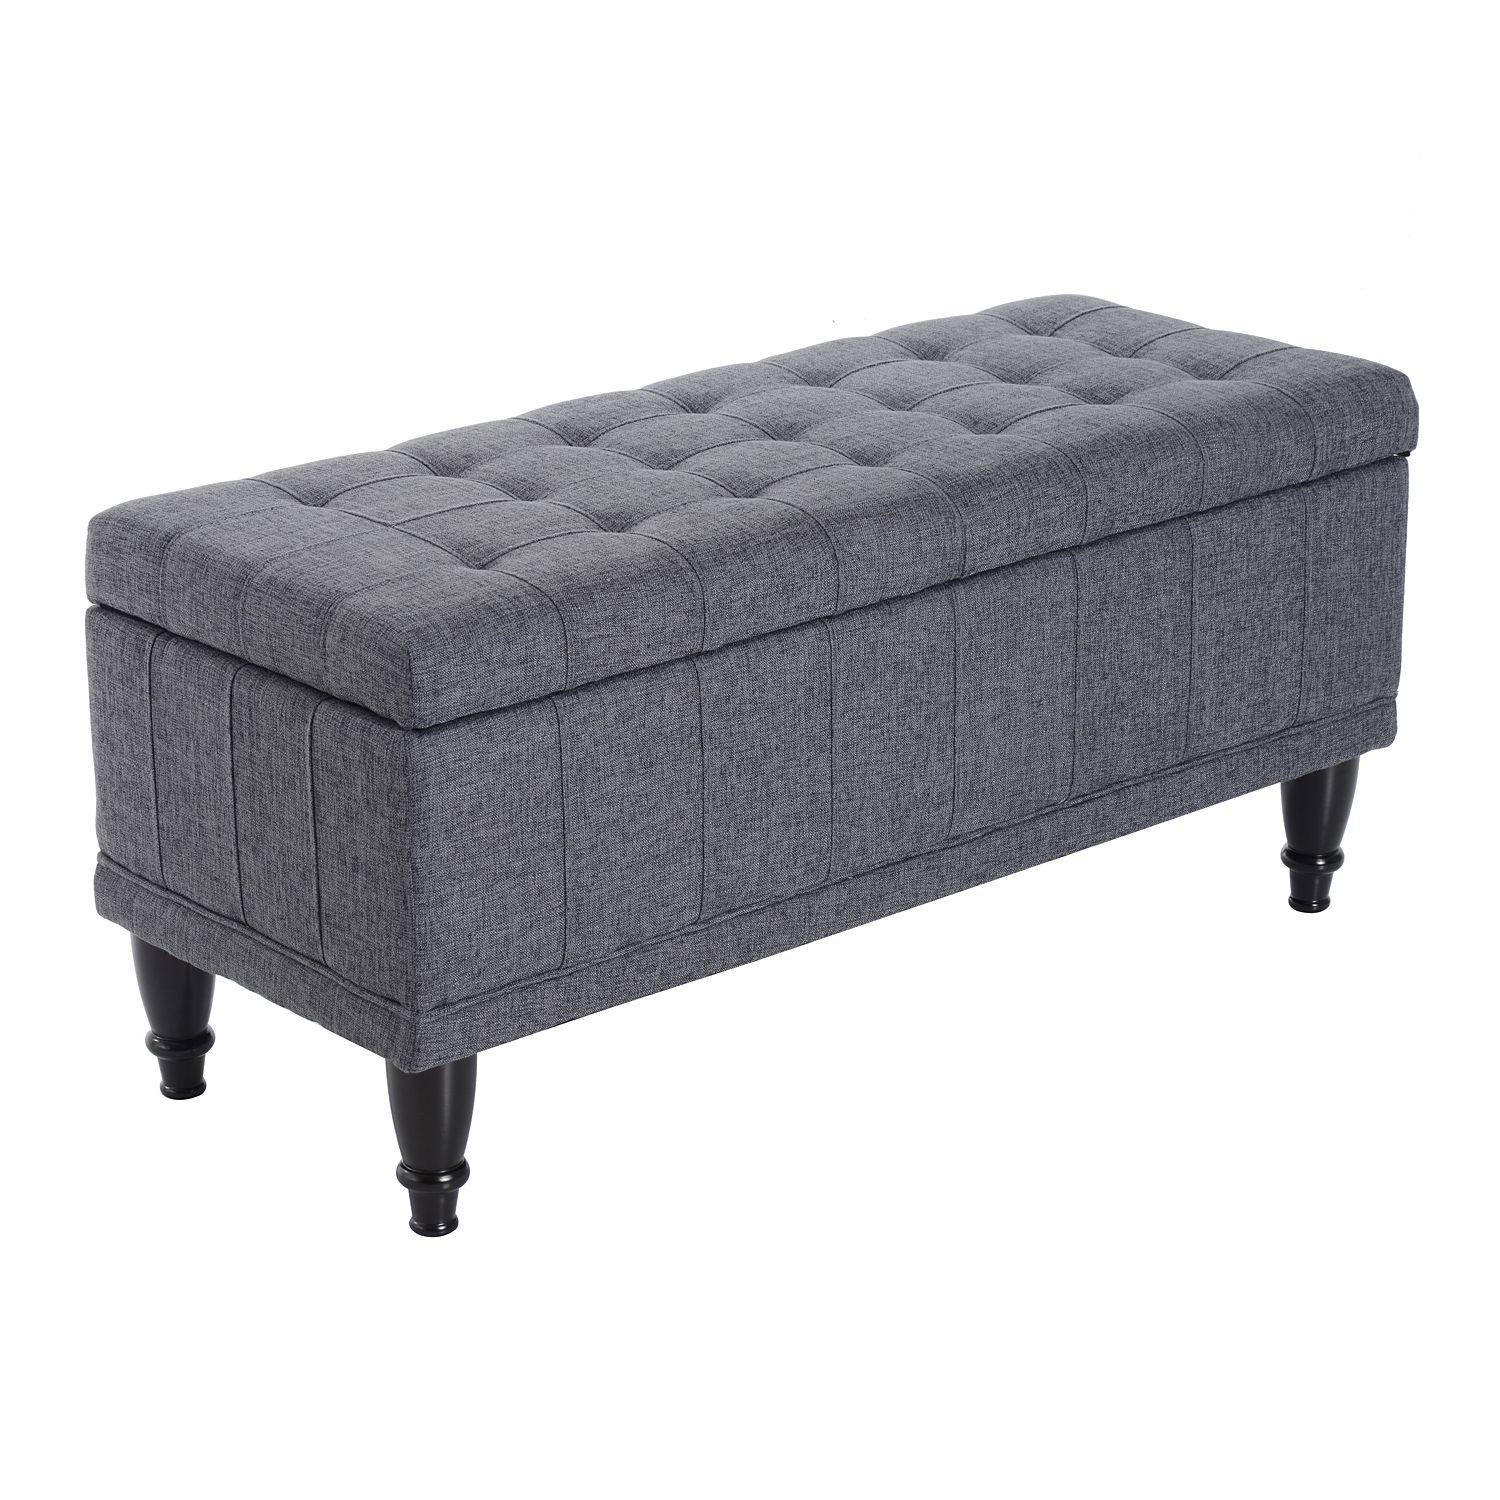 Large 42" Tufted Linen Fabric Ottoman Storage Bench – Dark Heather Grey Within Charcoal Fabric Tufted Storage Ottomans (View 2 of 20)